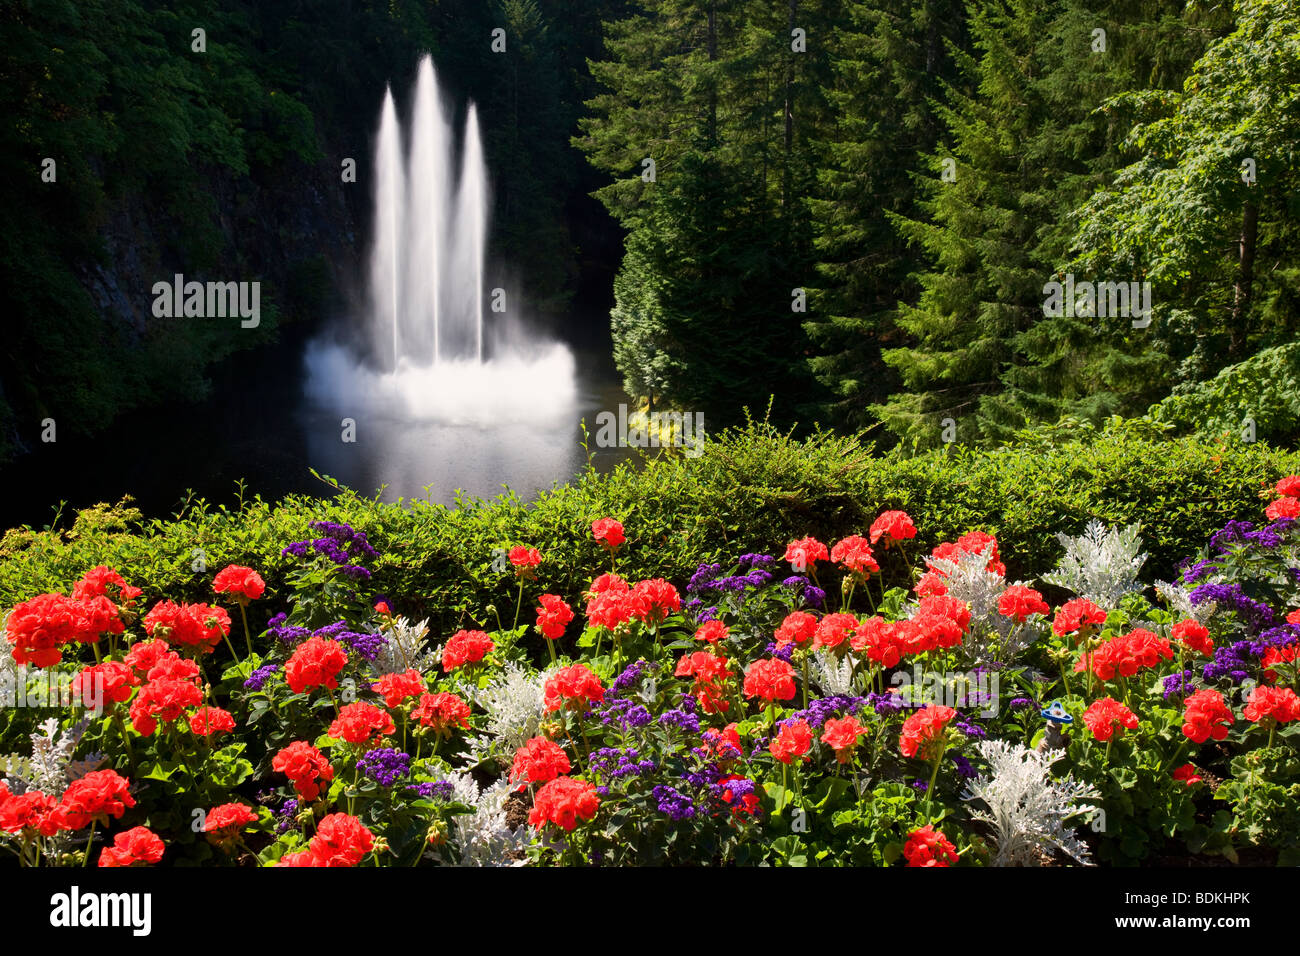 ross fountain at the butchart gardens victoria vancouver island british BDKHPK